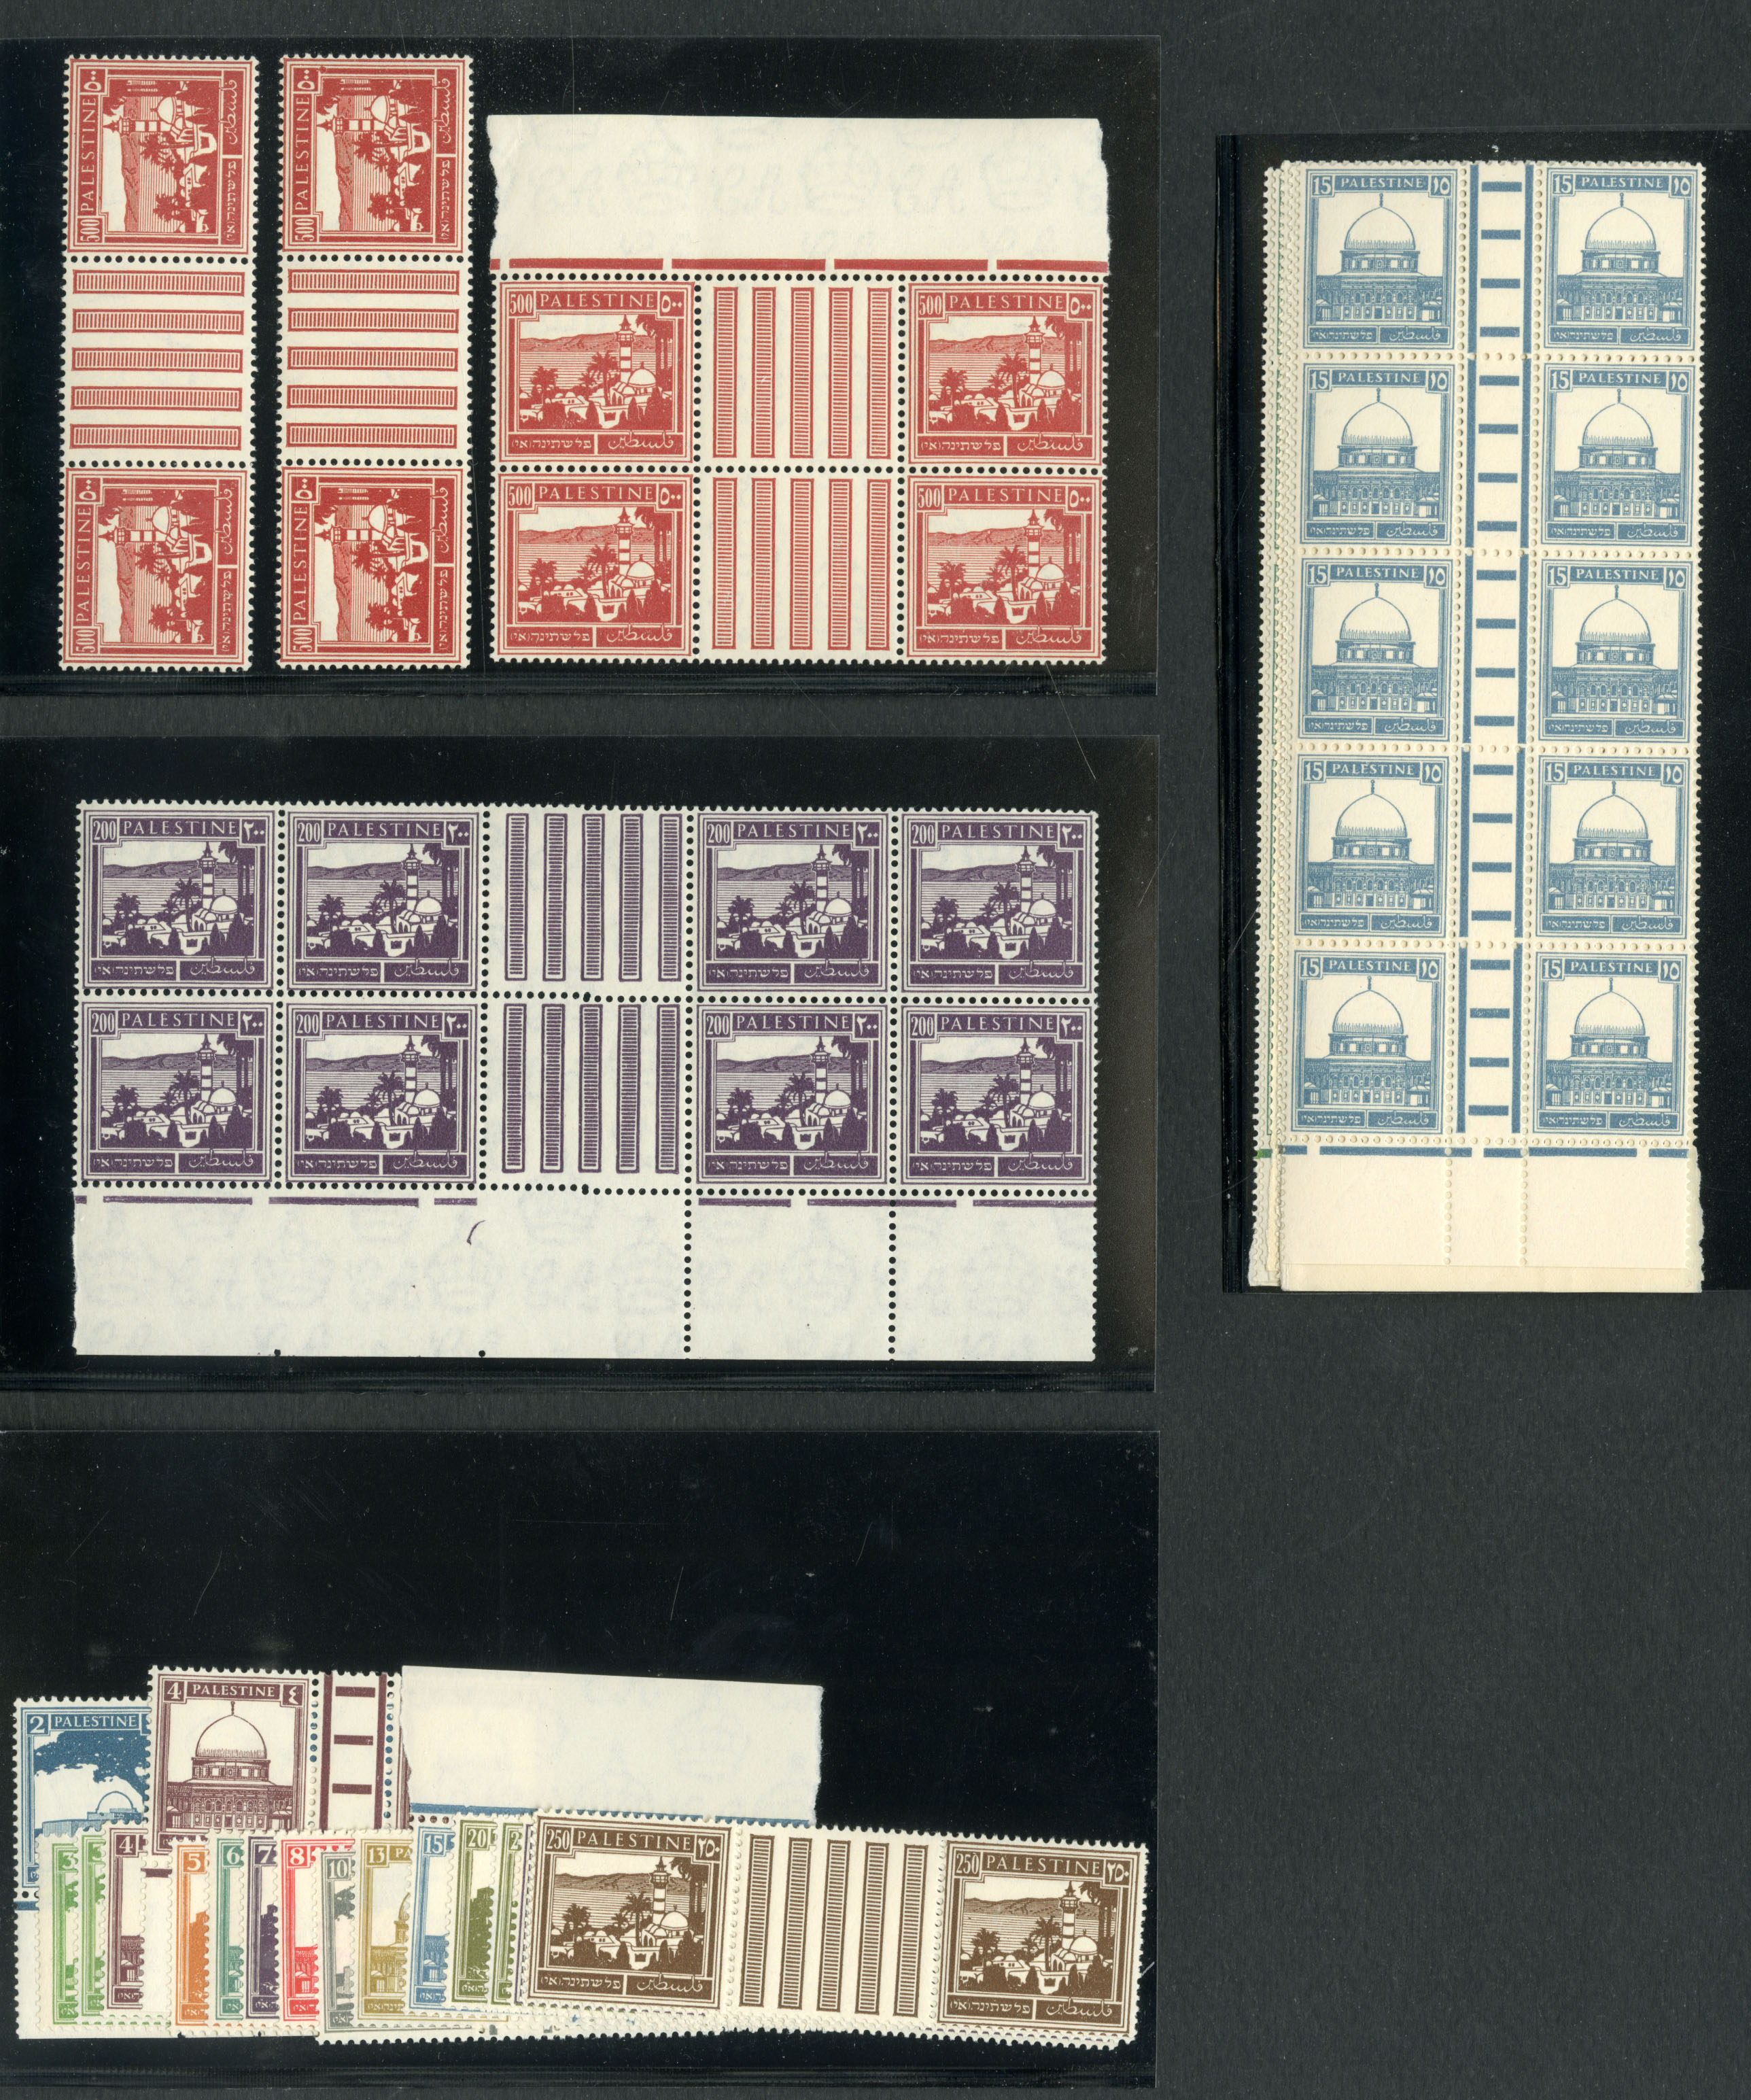 Lot 891 - ISRAEL - HOLYLAND Austrian Offices in the Holyland  -  Cherrystone Auctions U.S. & Worldwide Stamps & Postal History